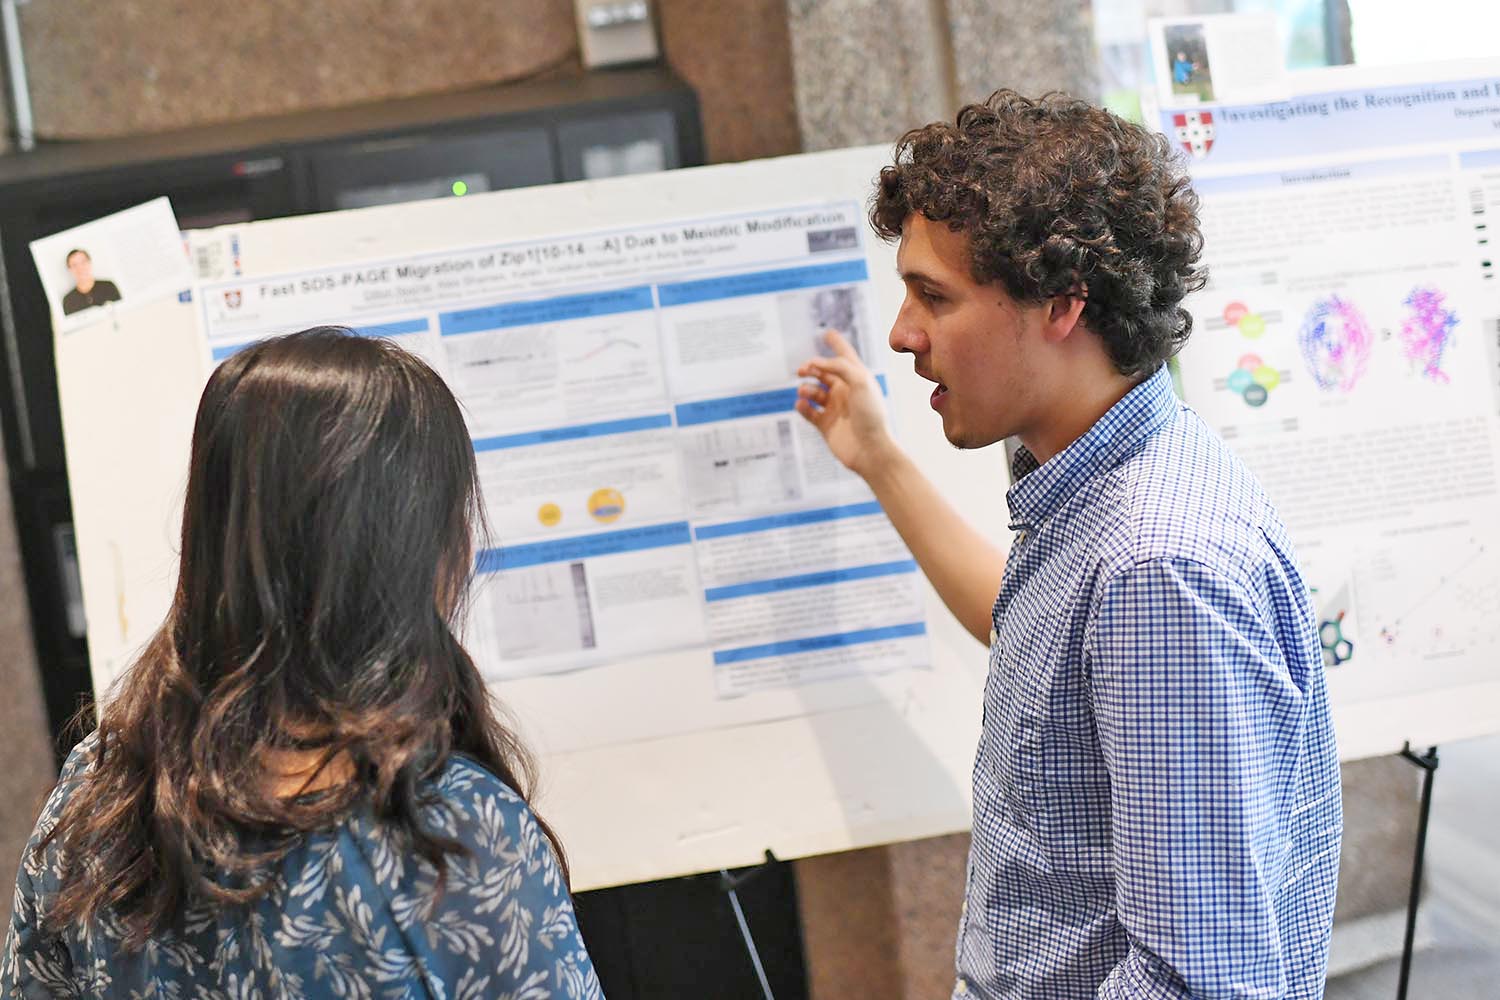 Dillon Noone '20 presented "Fast SDS-PAGE Migration of Zip1[10-14àA] Due to Meiotic Modification." His advisor is Amy MacQueen, associate professor of molecular biology and biochemistry.